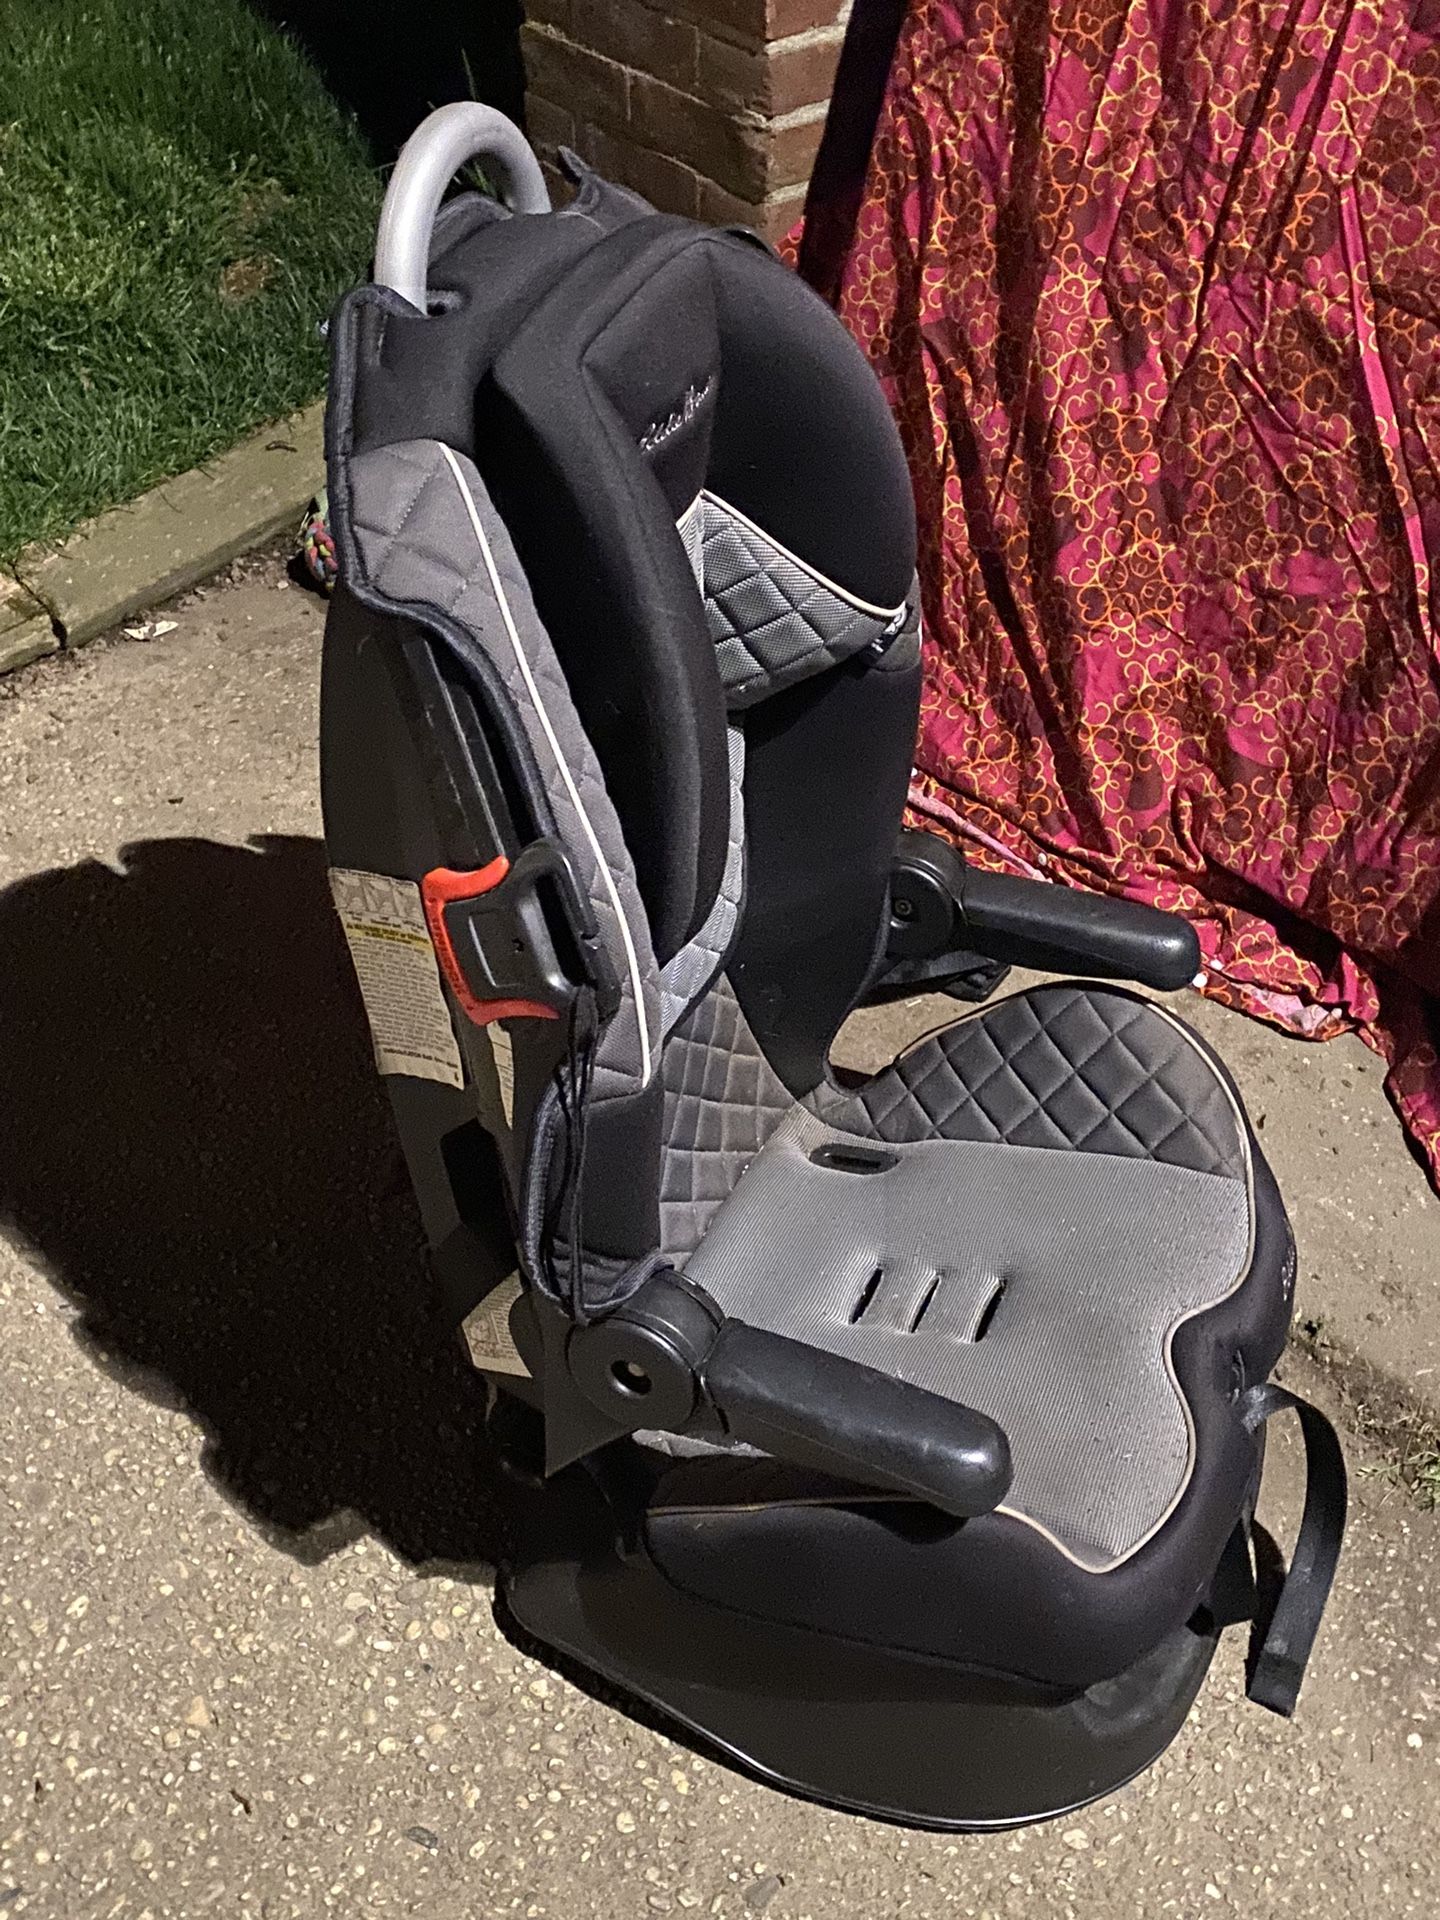 Eddie Bauer Deluxe High-Back Booster Seat 